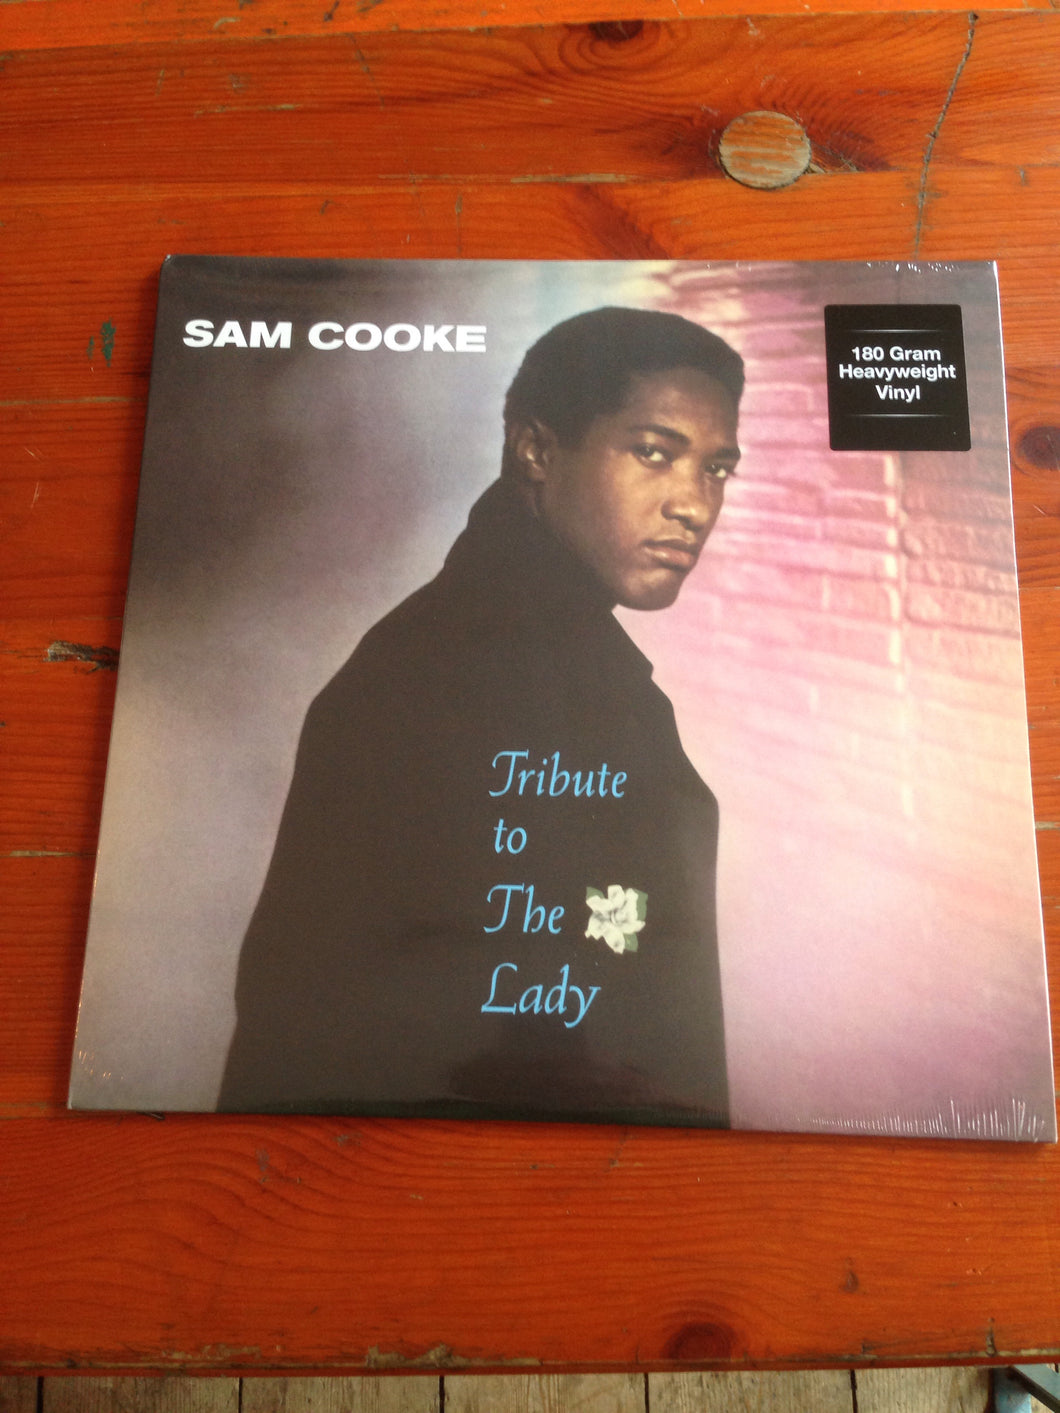 Sam Cooke - Tribute To The Lady